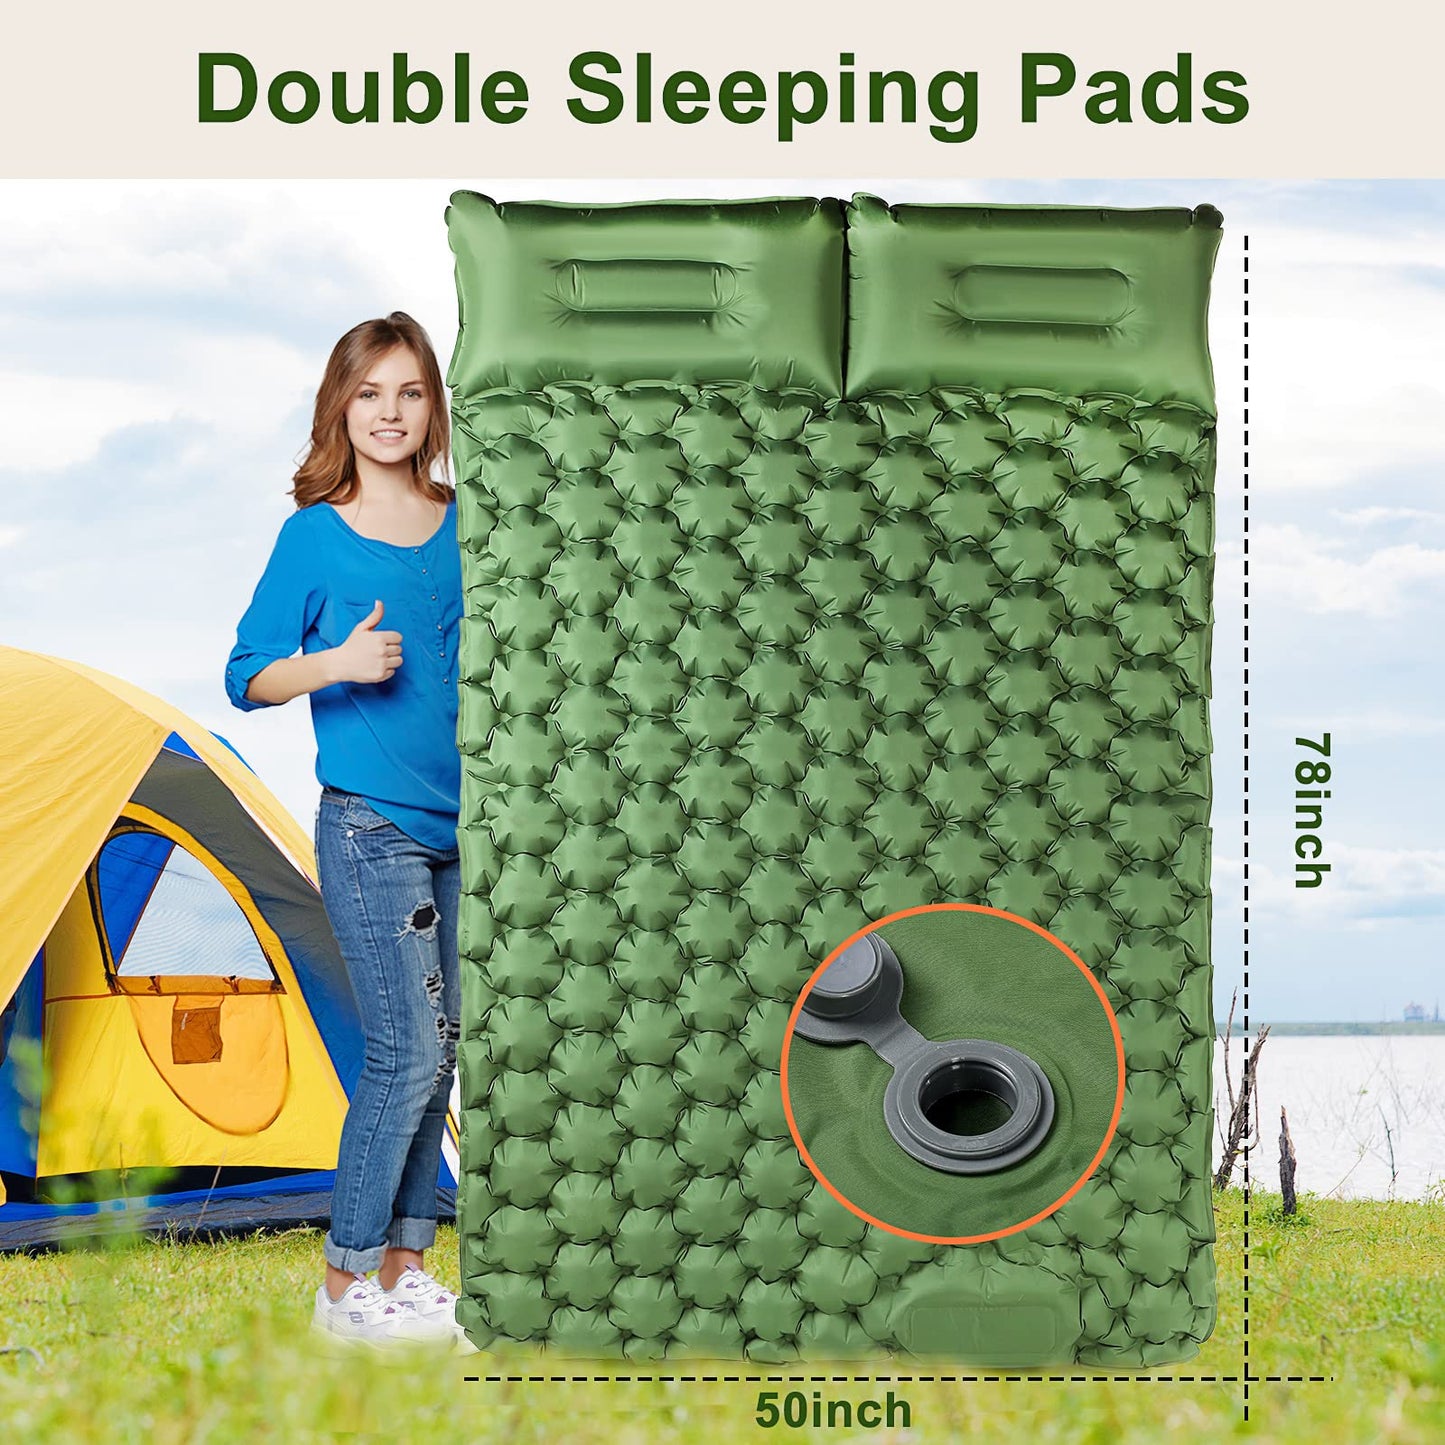 Double Sleeping Pad for Camping - Self Inflating Camping Mattress with Pillow/Ultralight Waterproof Sleeping Mat for Backpacking